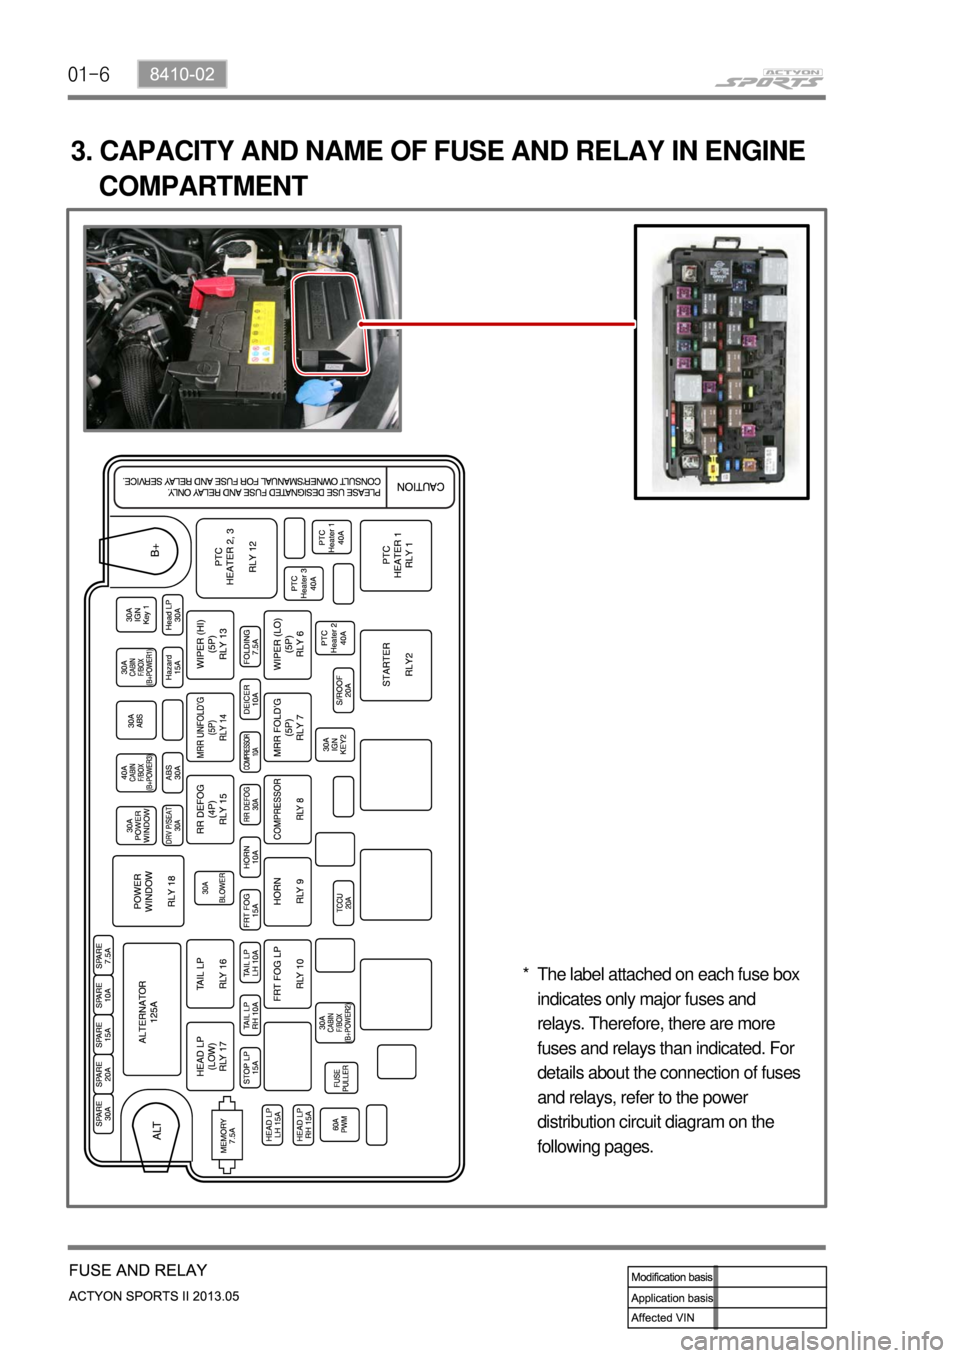 SSANGYONG NEW ACTYON SPORTS 2013  Service Manual 01-6
3. CAPACITY AND NAME OF FUSE AND RELAY IN ENGINE 
    COMPARTMENT
The label attached on each fuse box 
indicates only major fuses and 
relays. Therefore, there are more 
fuses and relays than ind